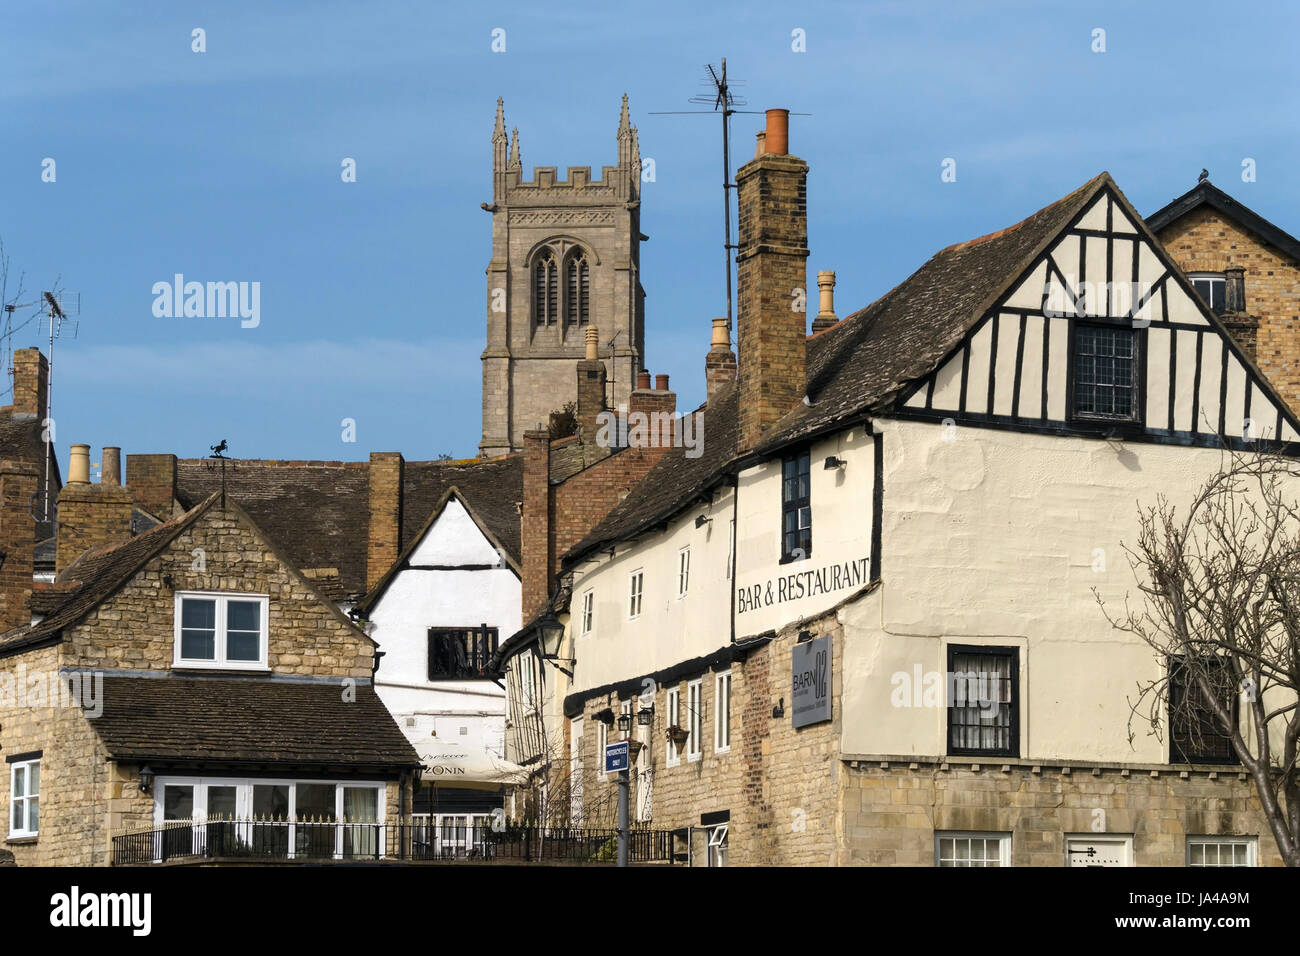 Old buildings, rooftops and St Johns Church Tower on a sunny day with blue sky above, Stamford, Lincolnshire, England, UK Stock Photo